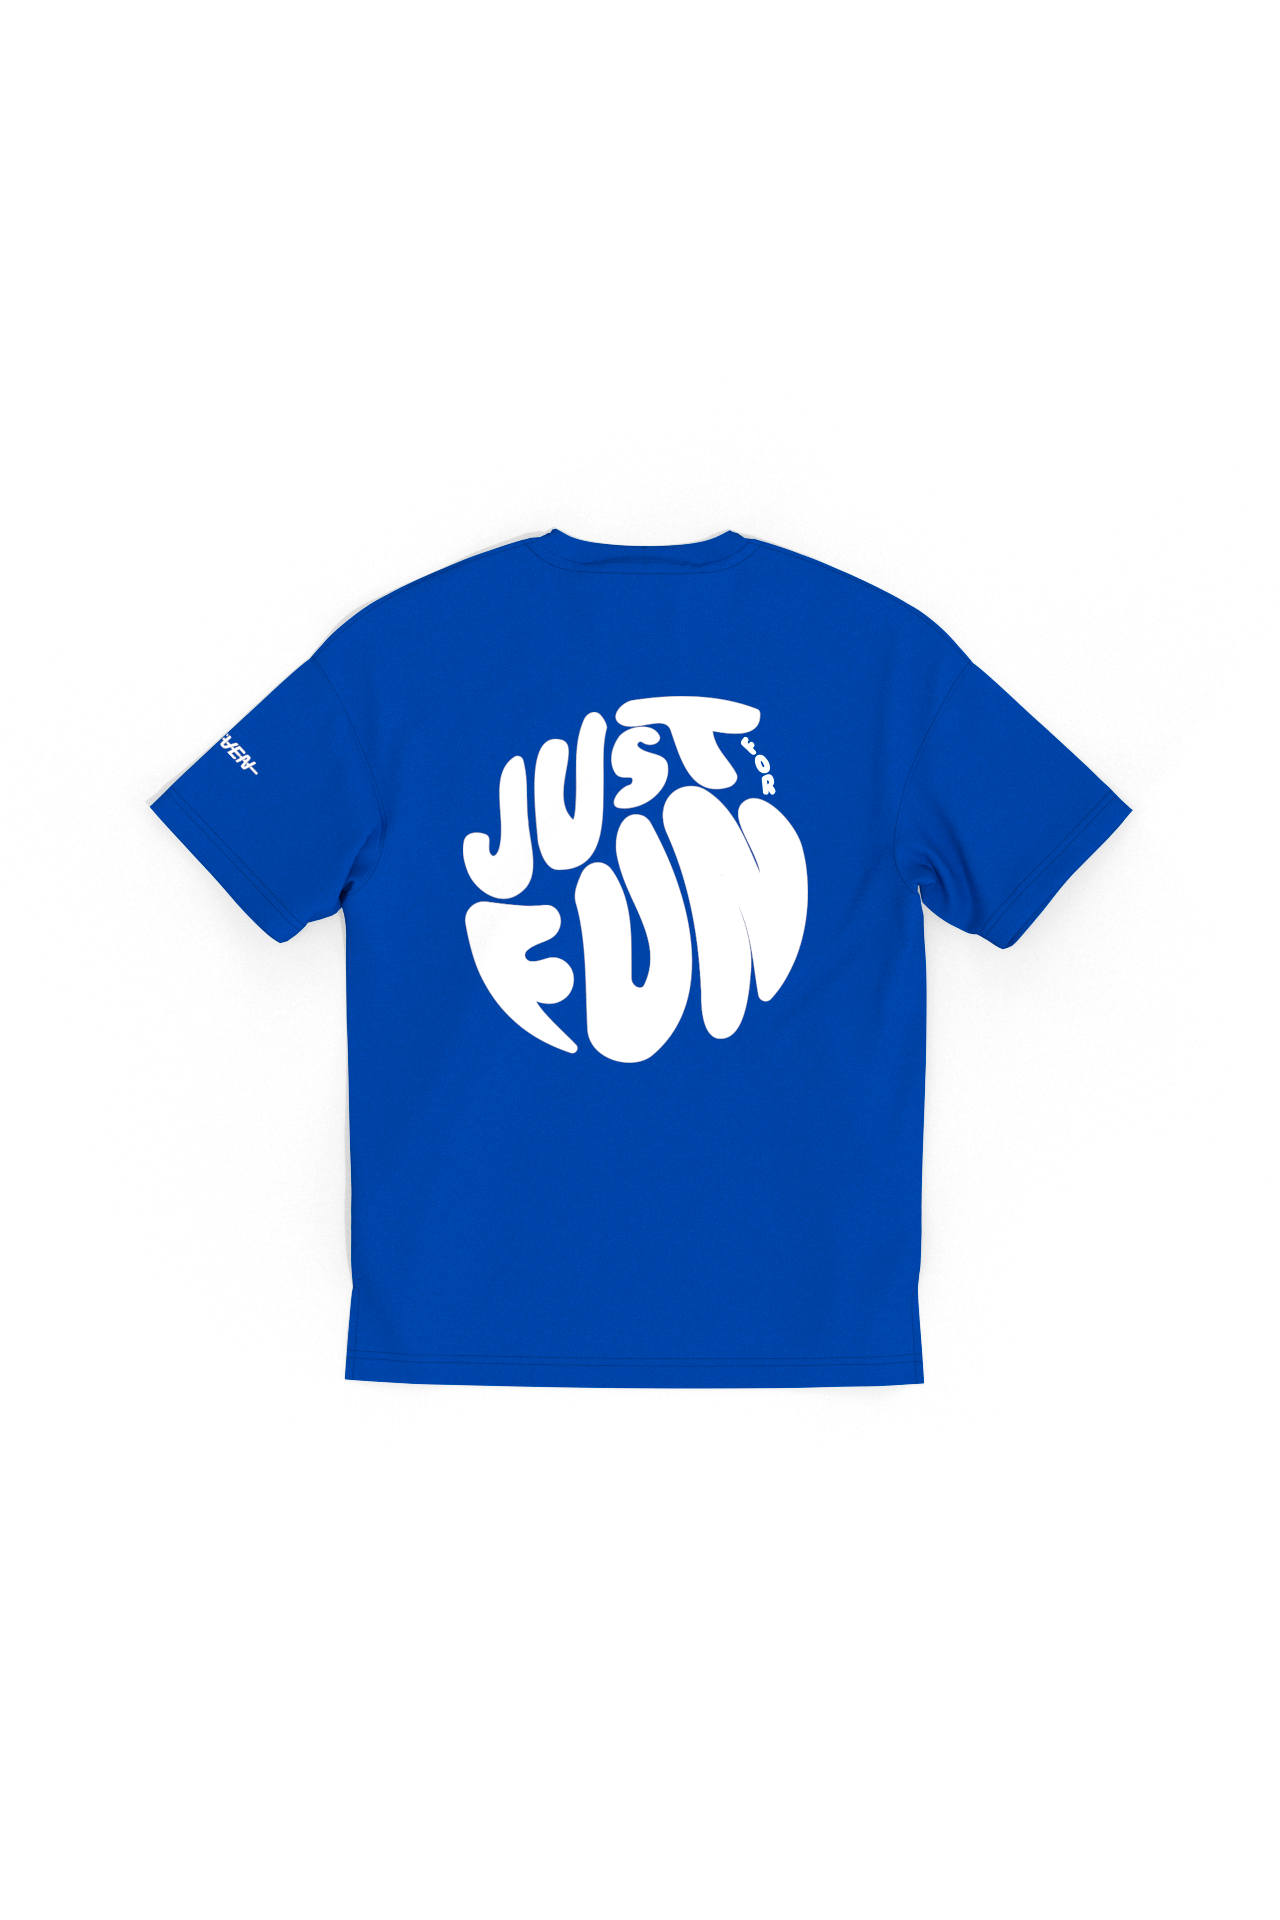 Just For Fun Acid Blue Tee